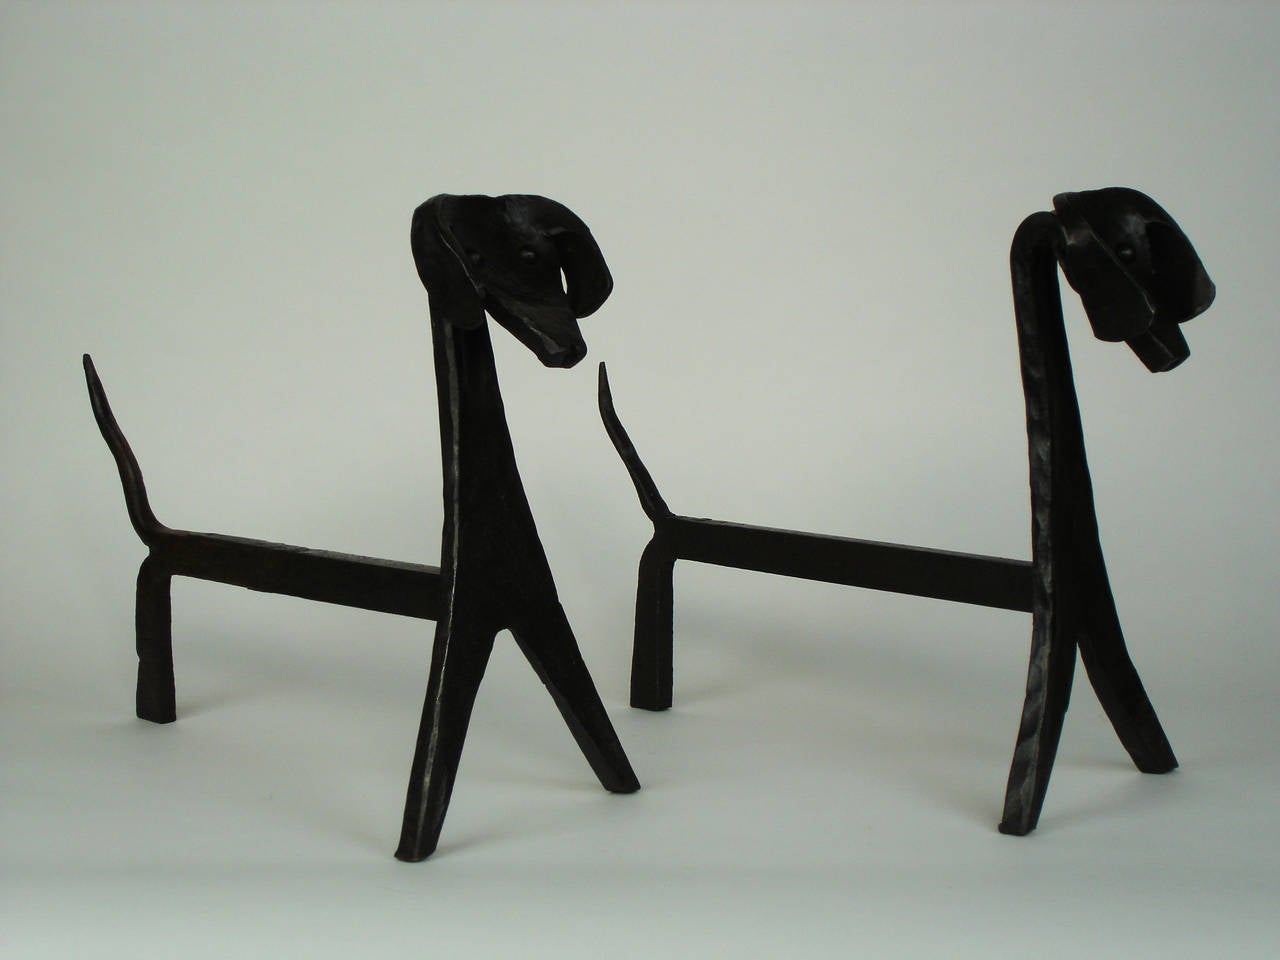 Two wrought iron andirons in shape of stylized dog.